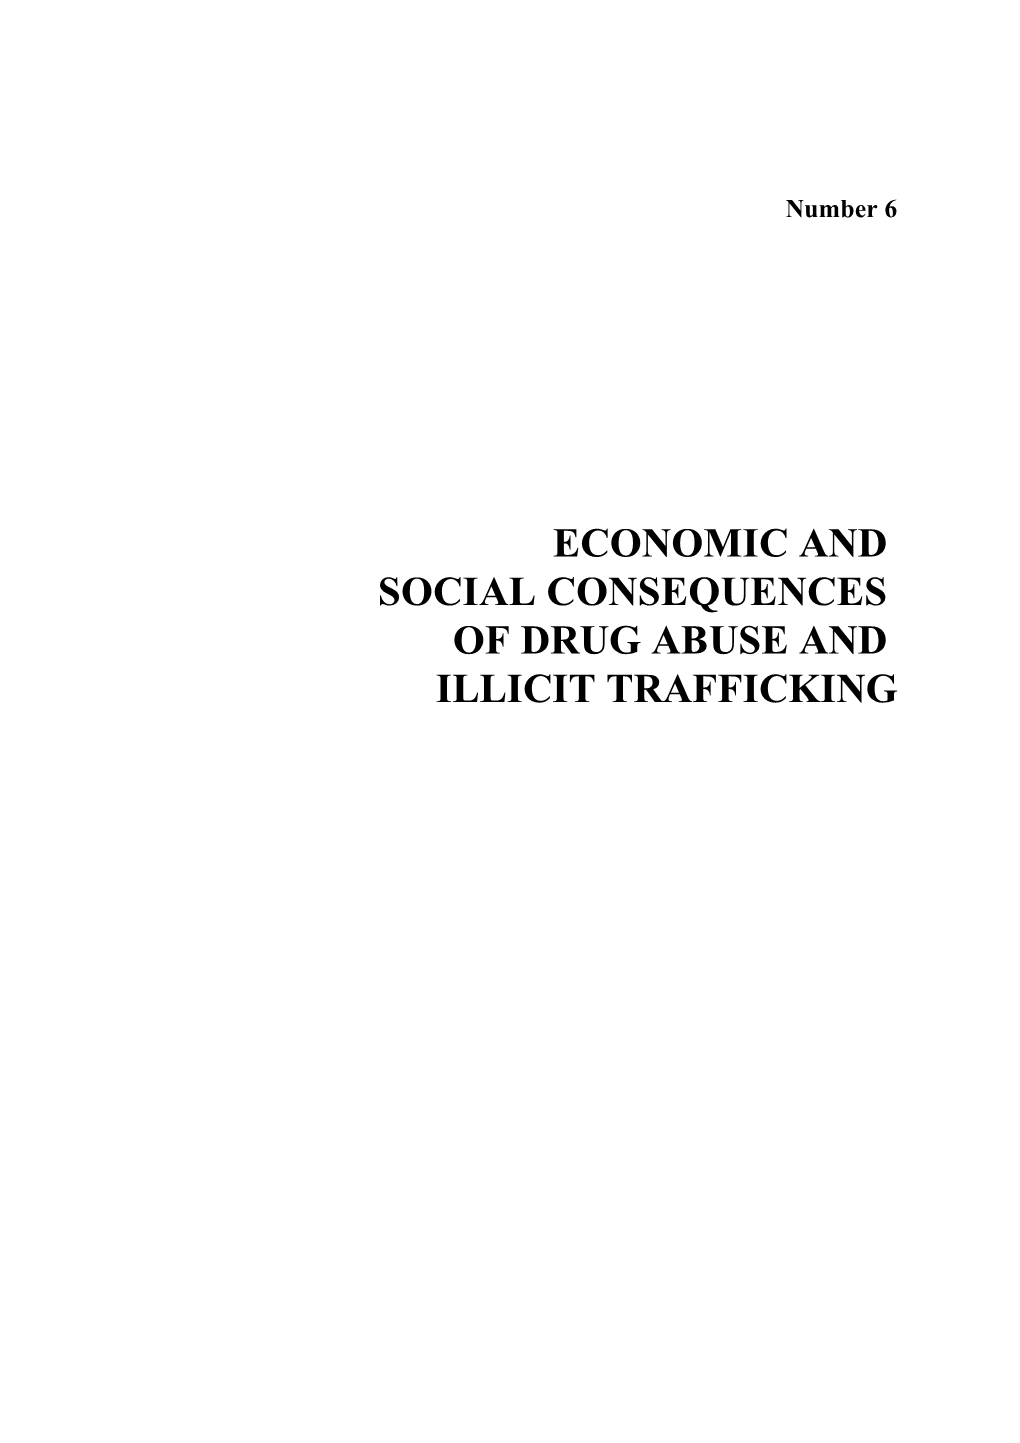 Economic and Social Consequences of Drug Abuse and Illicit Trafficking Note